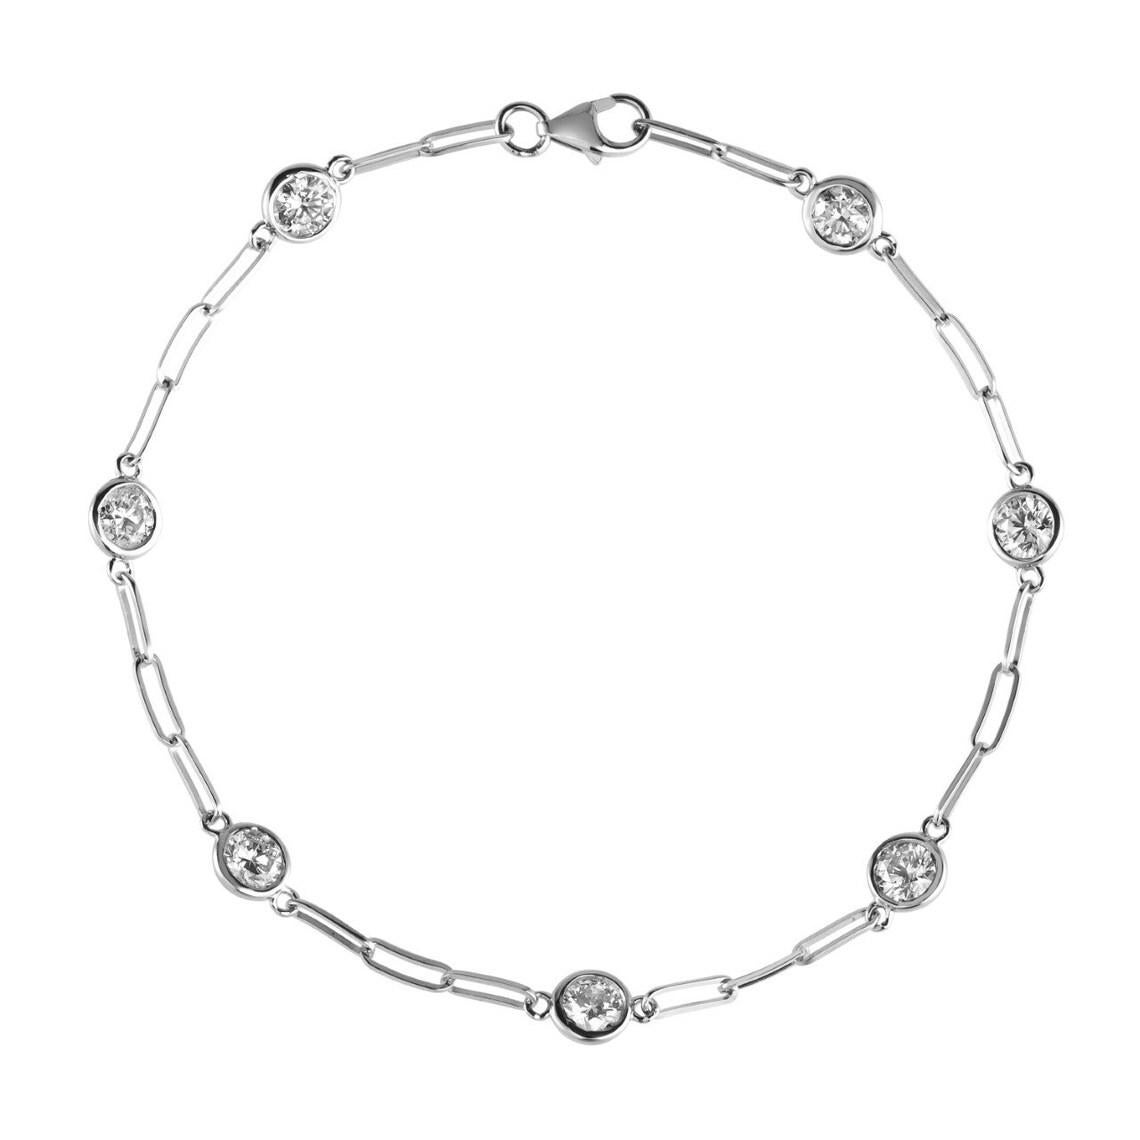 0.52 Carat Natural Diamond Paper Clip Bracelet G SI 14K White Gold 7 inches

100% Natural Diamonds, Not Enhanced in any way
0.52CT
G-H 
SI  
14K White Gold, Bezel set, 1.2 grams
7 inches in length, 1/8 inch in width
7 diamonds, each diamond is